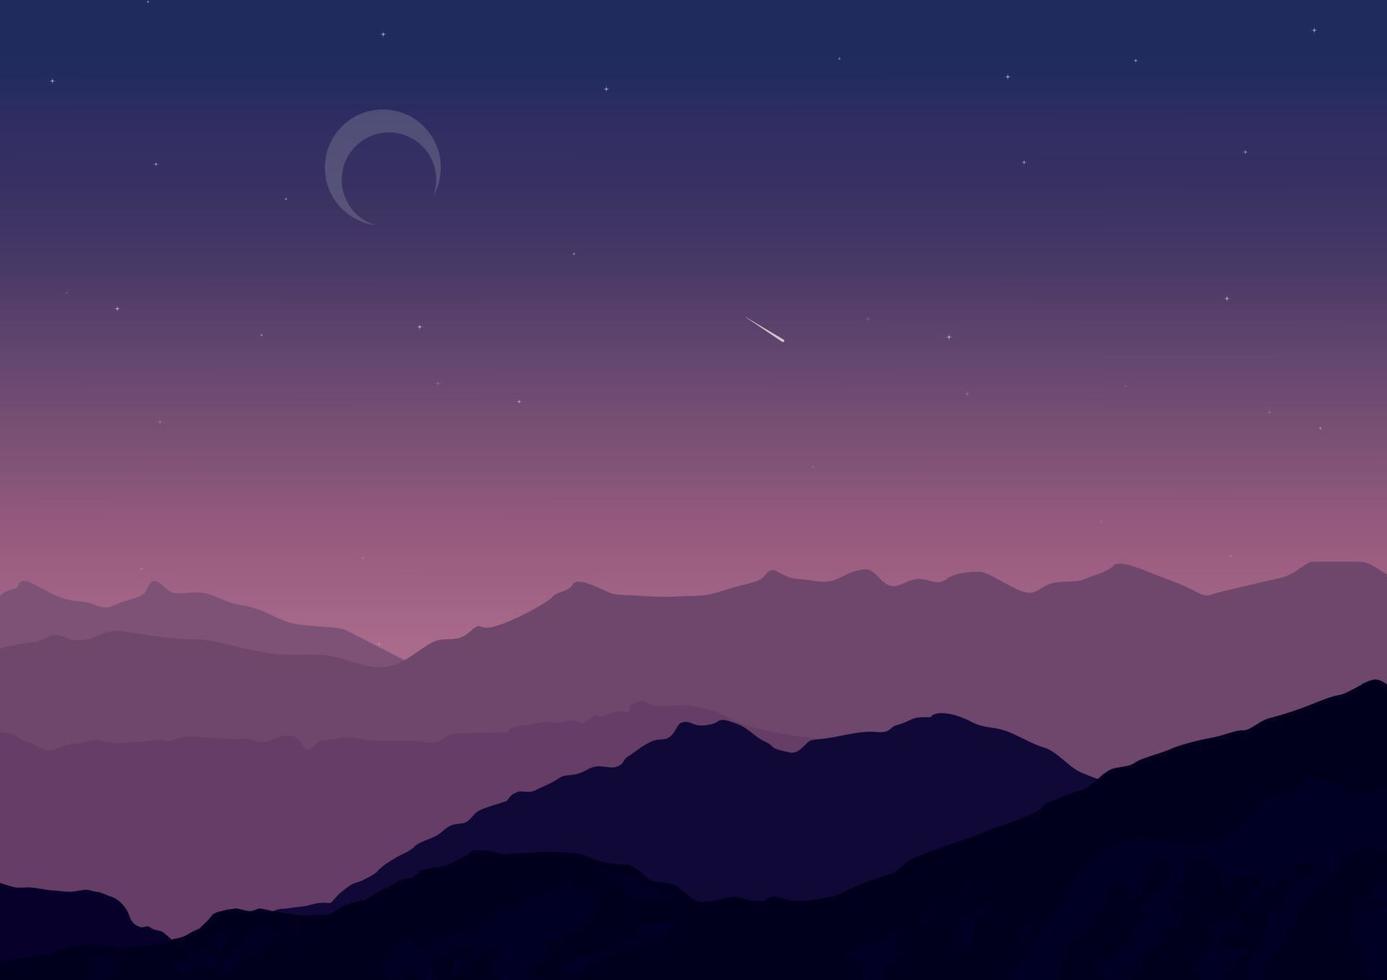 night mountains landscape vector with a moon and purple tone.